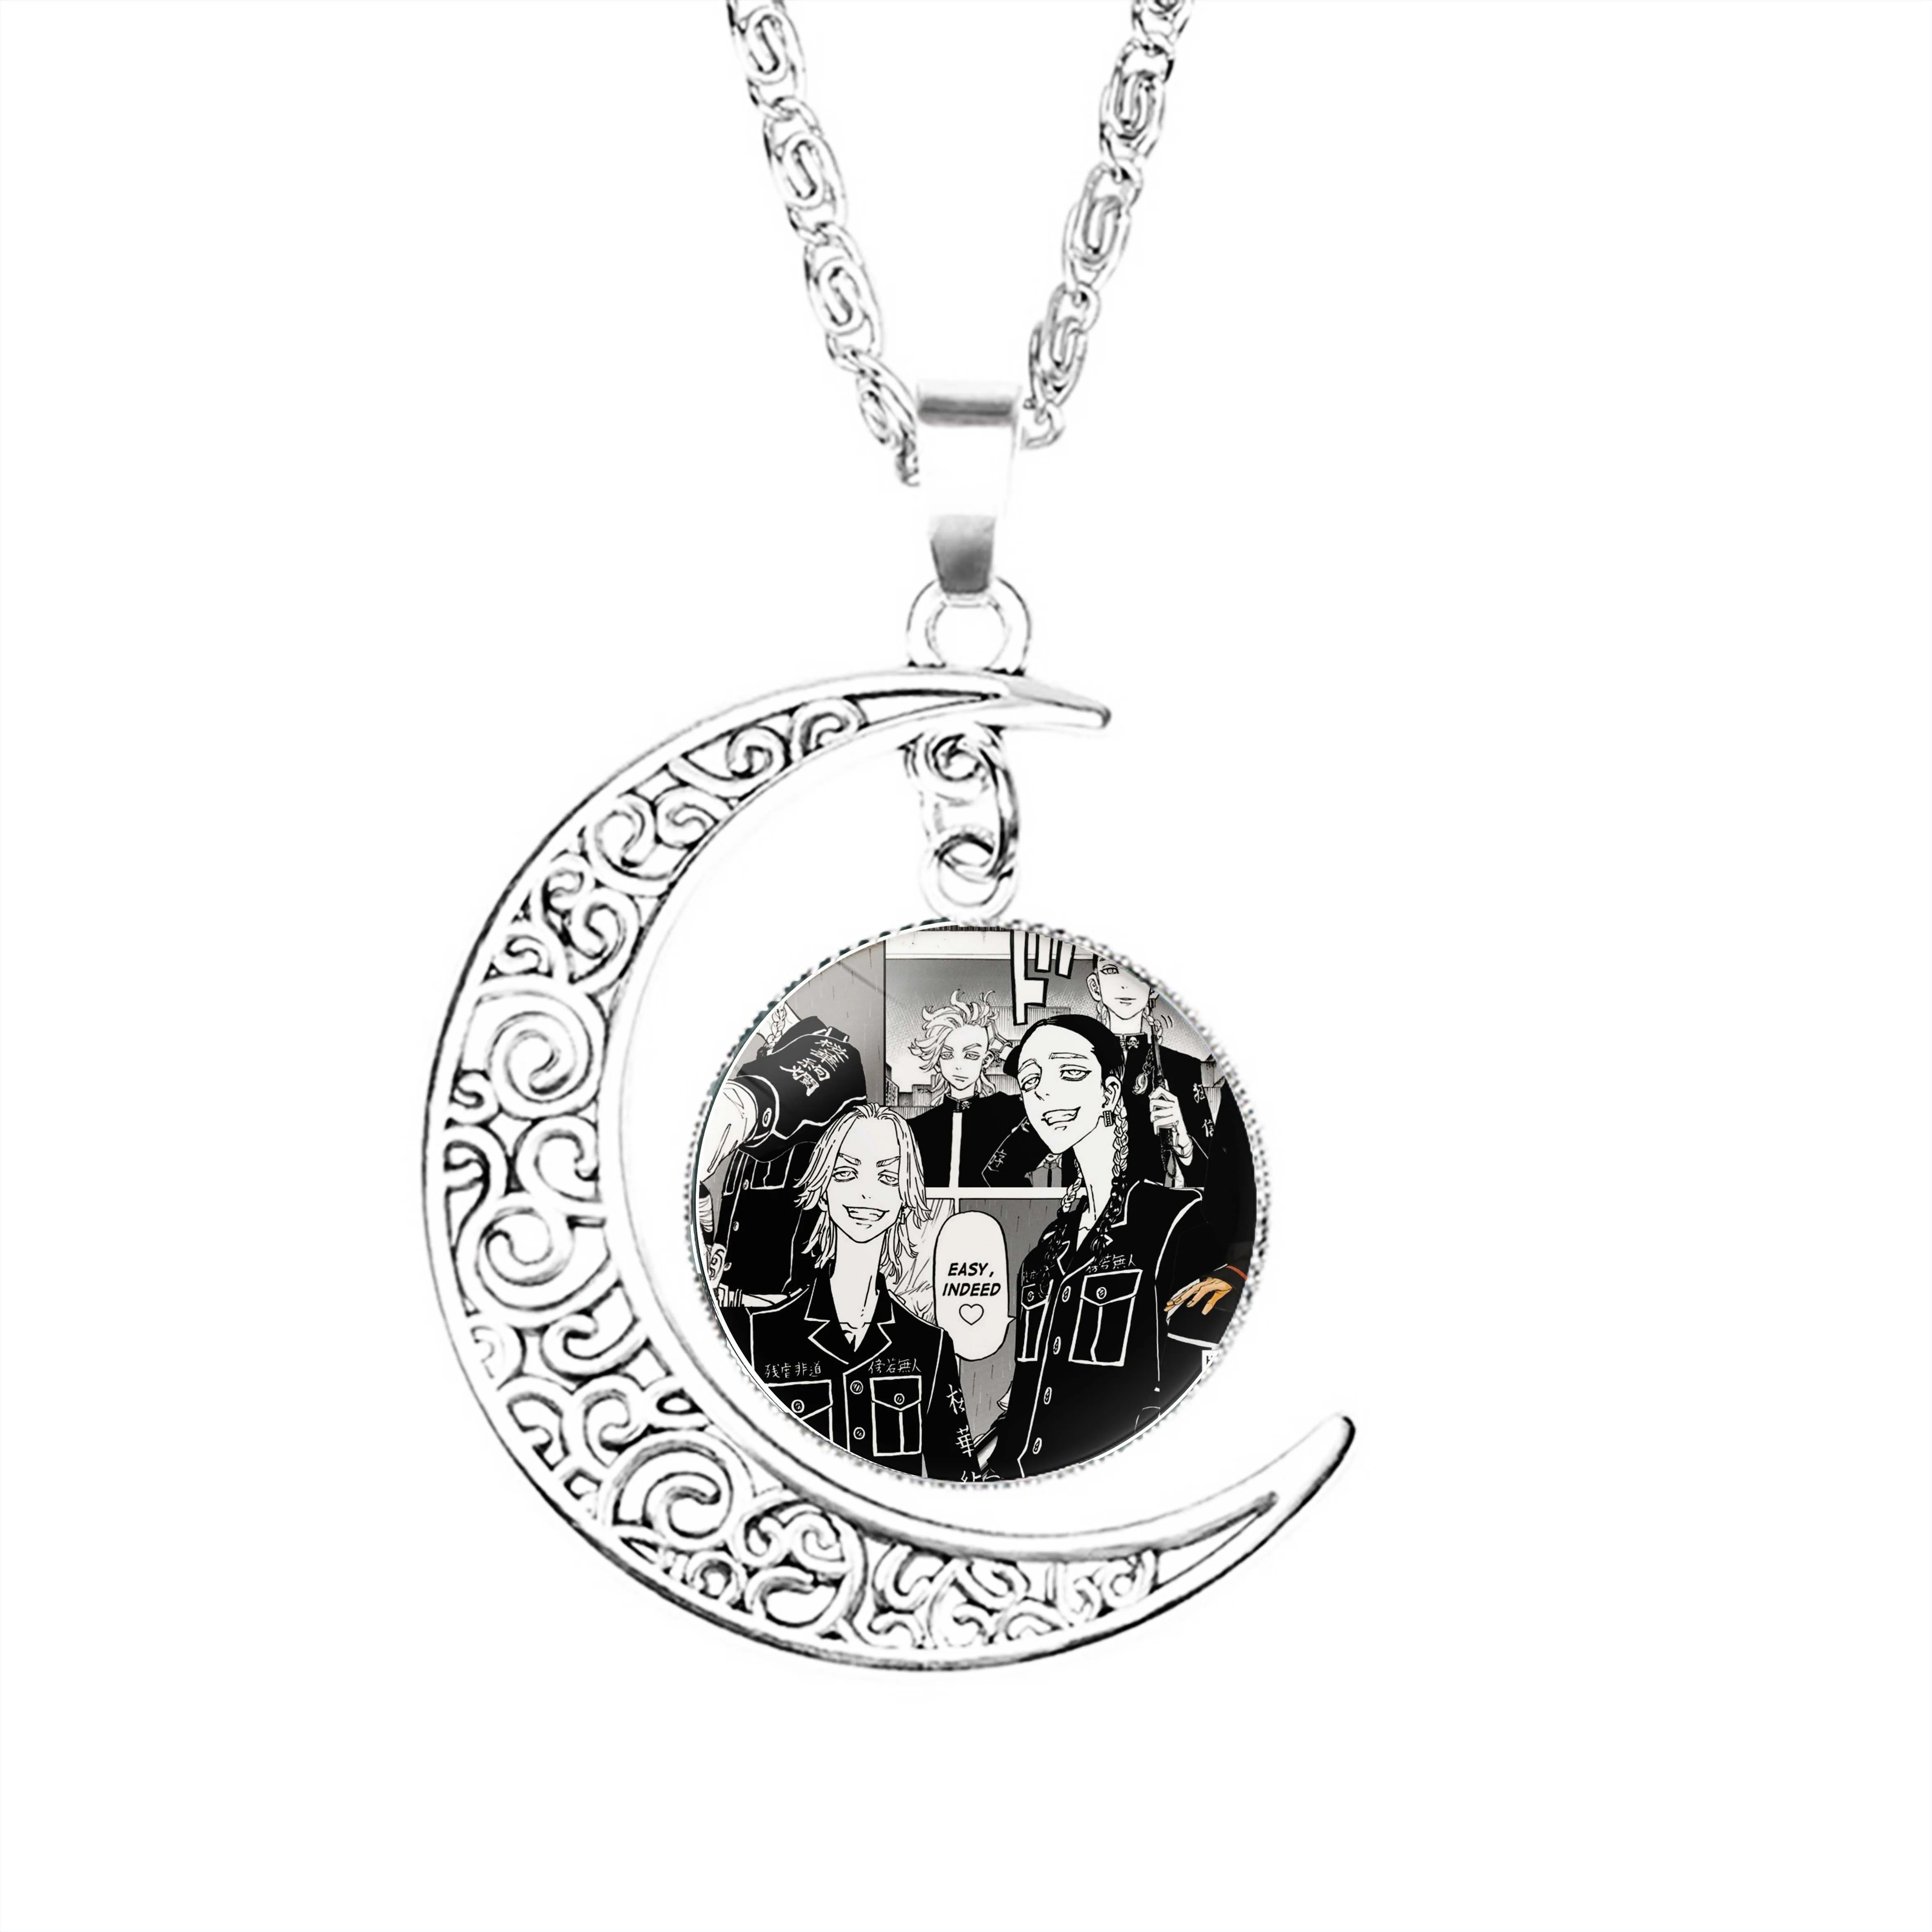 Haitani Brothers Rindou Ran Manga Collage Tr  Moon Necklace Crescent Pendant Dome Fashion Lady Men Gifts Stainless Steel Girls